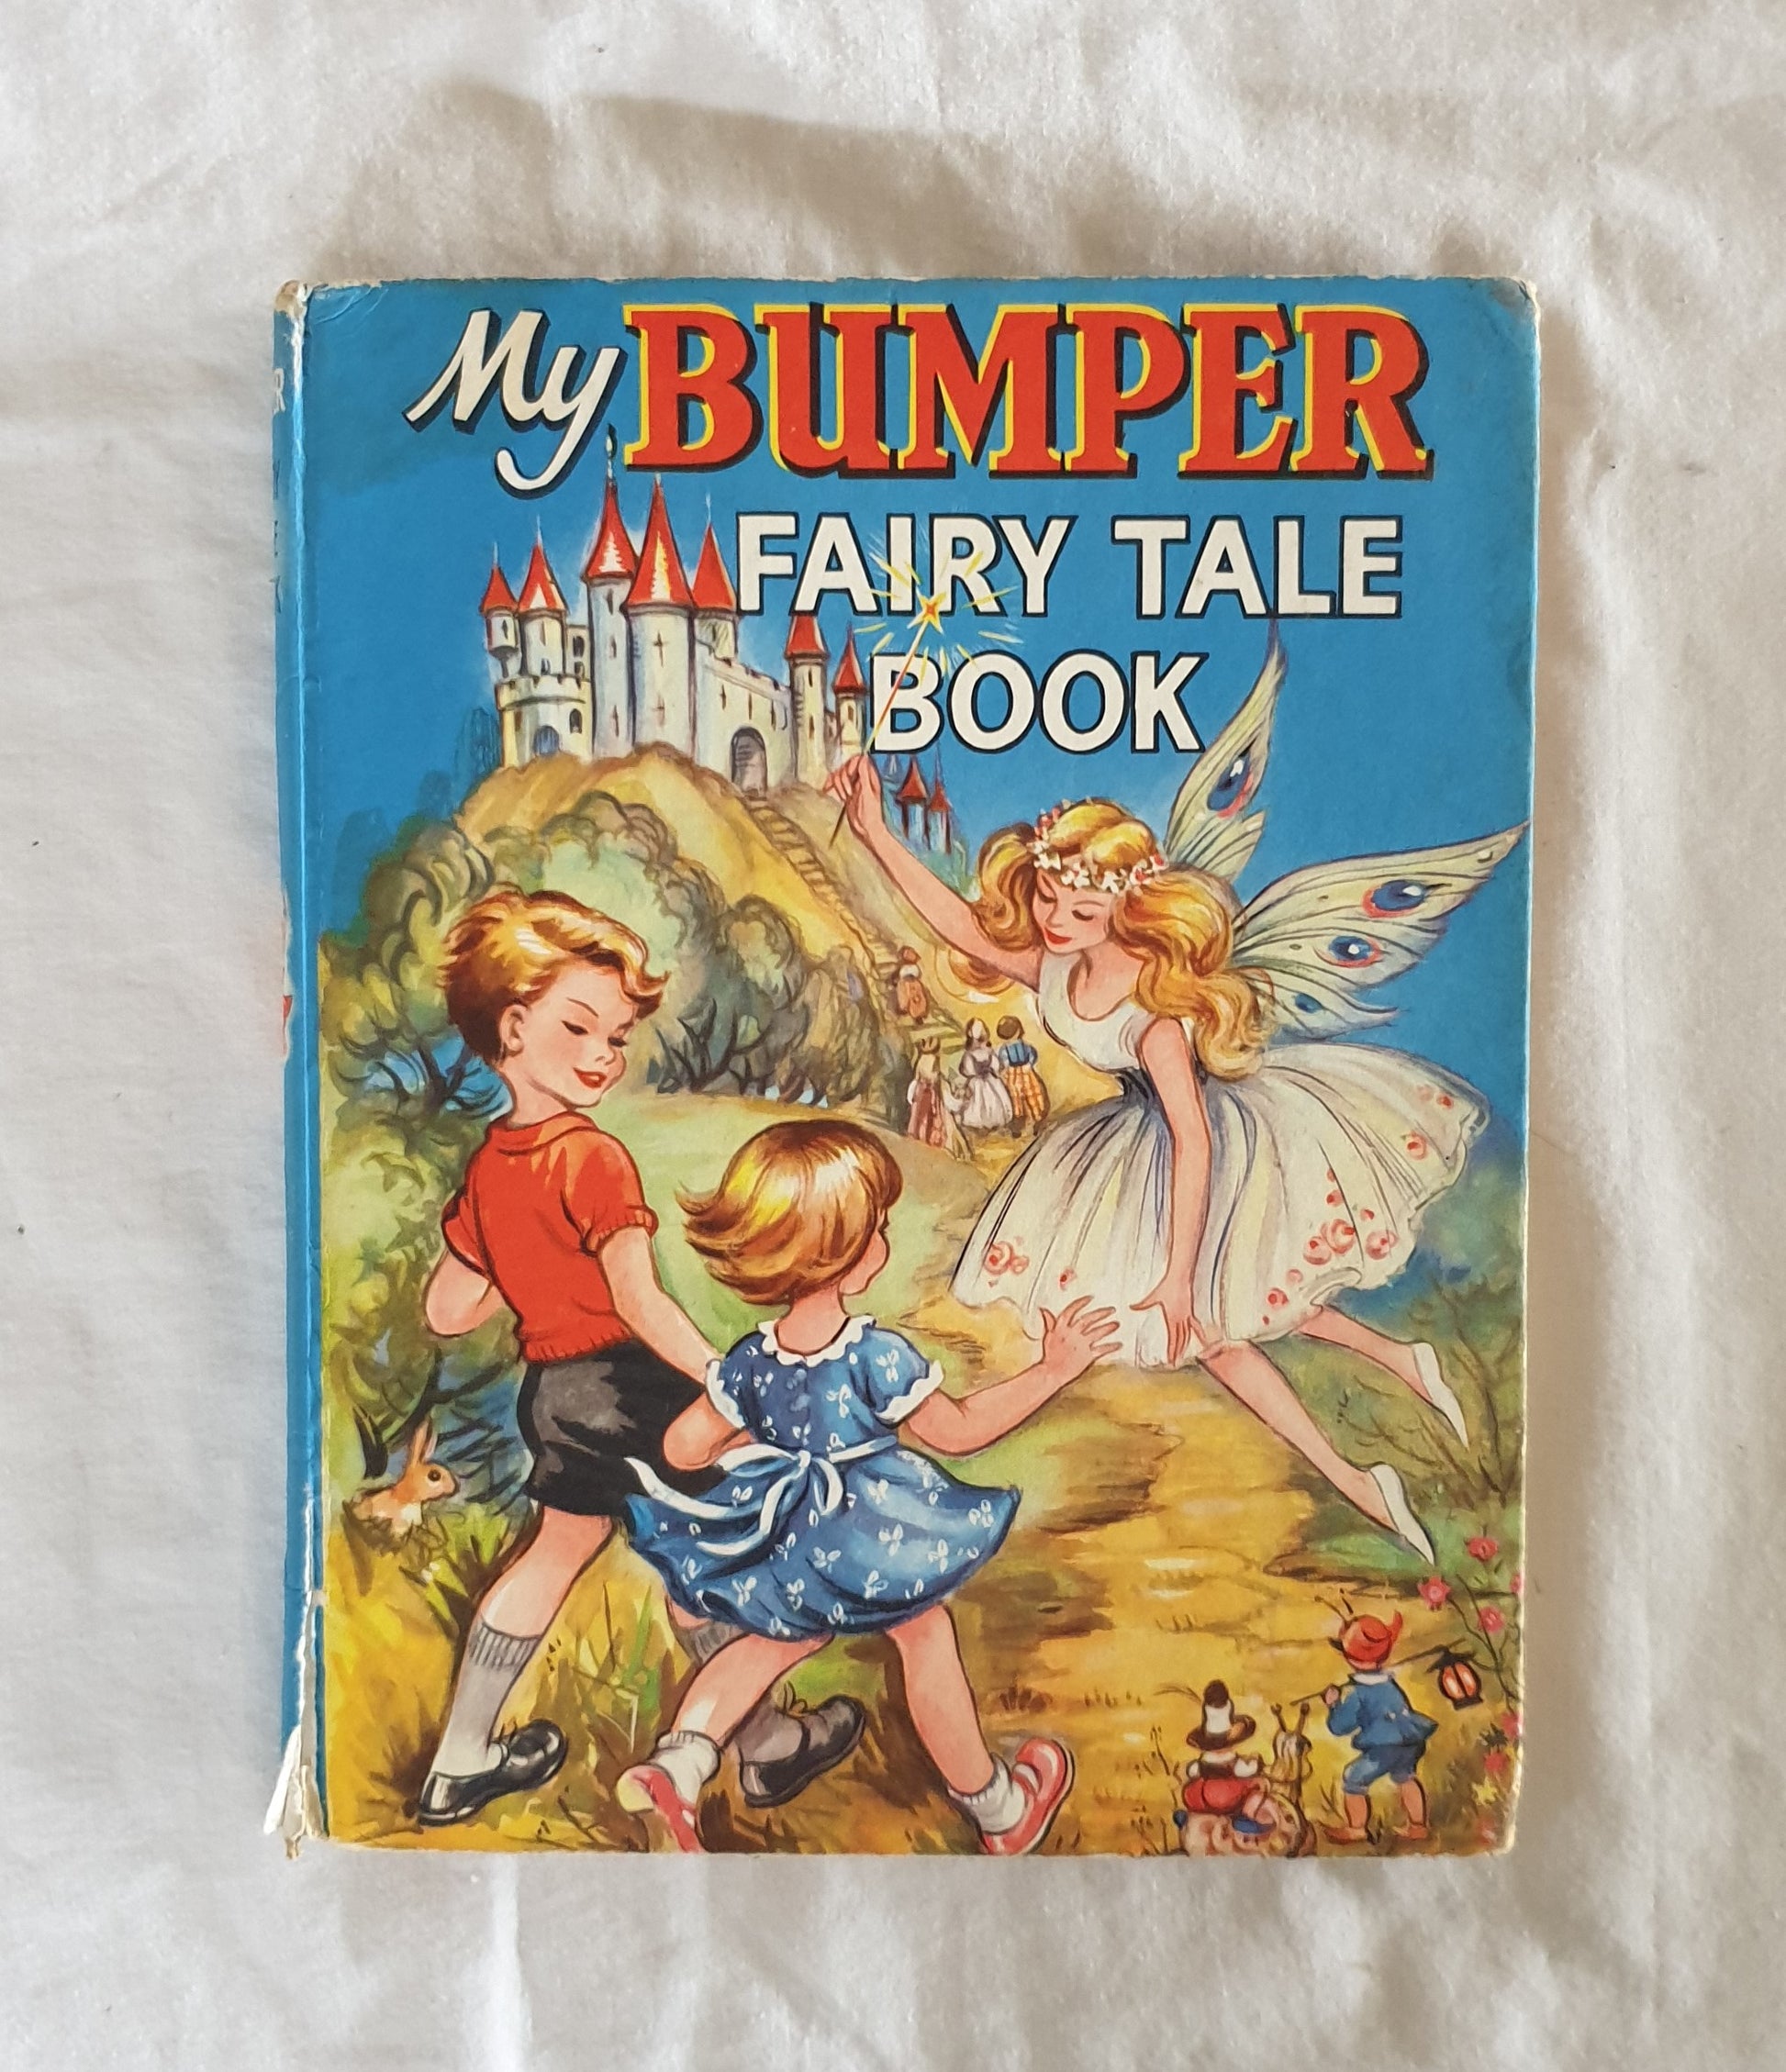 My Bumper Fairy-Tale Book illustrated by Doreen Baxter